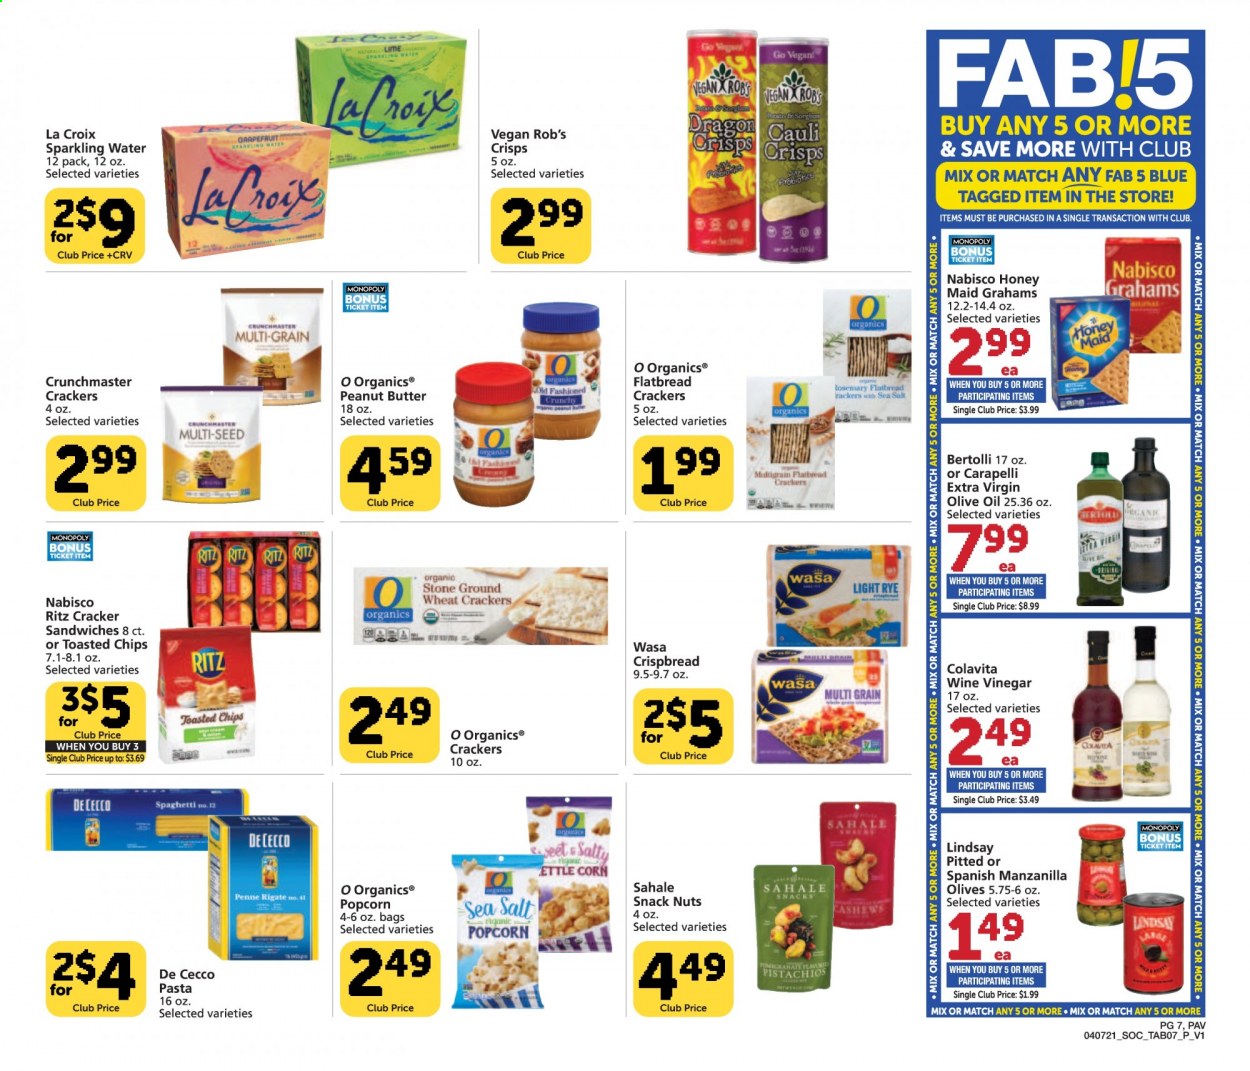 thumbnail - Pavilions Flyer - 04/07/2021 - 04/27/2021 - Sales products - flatbread, crispbread, corn, spaghetti, pasta, Bertolli, snack, crackers, RITZ, chips, popcorn, olives, Honey Maid, penne, extra virgin olive oil, wine vinegar, olive oil, oil, peanut butter, pistachios, sparkling water, wine, bag, plant seeds. Page 7.